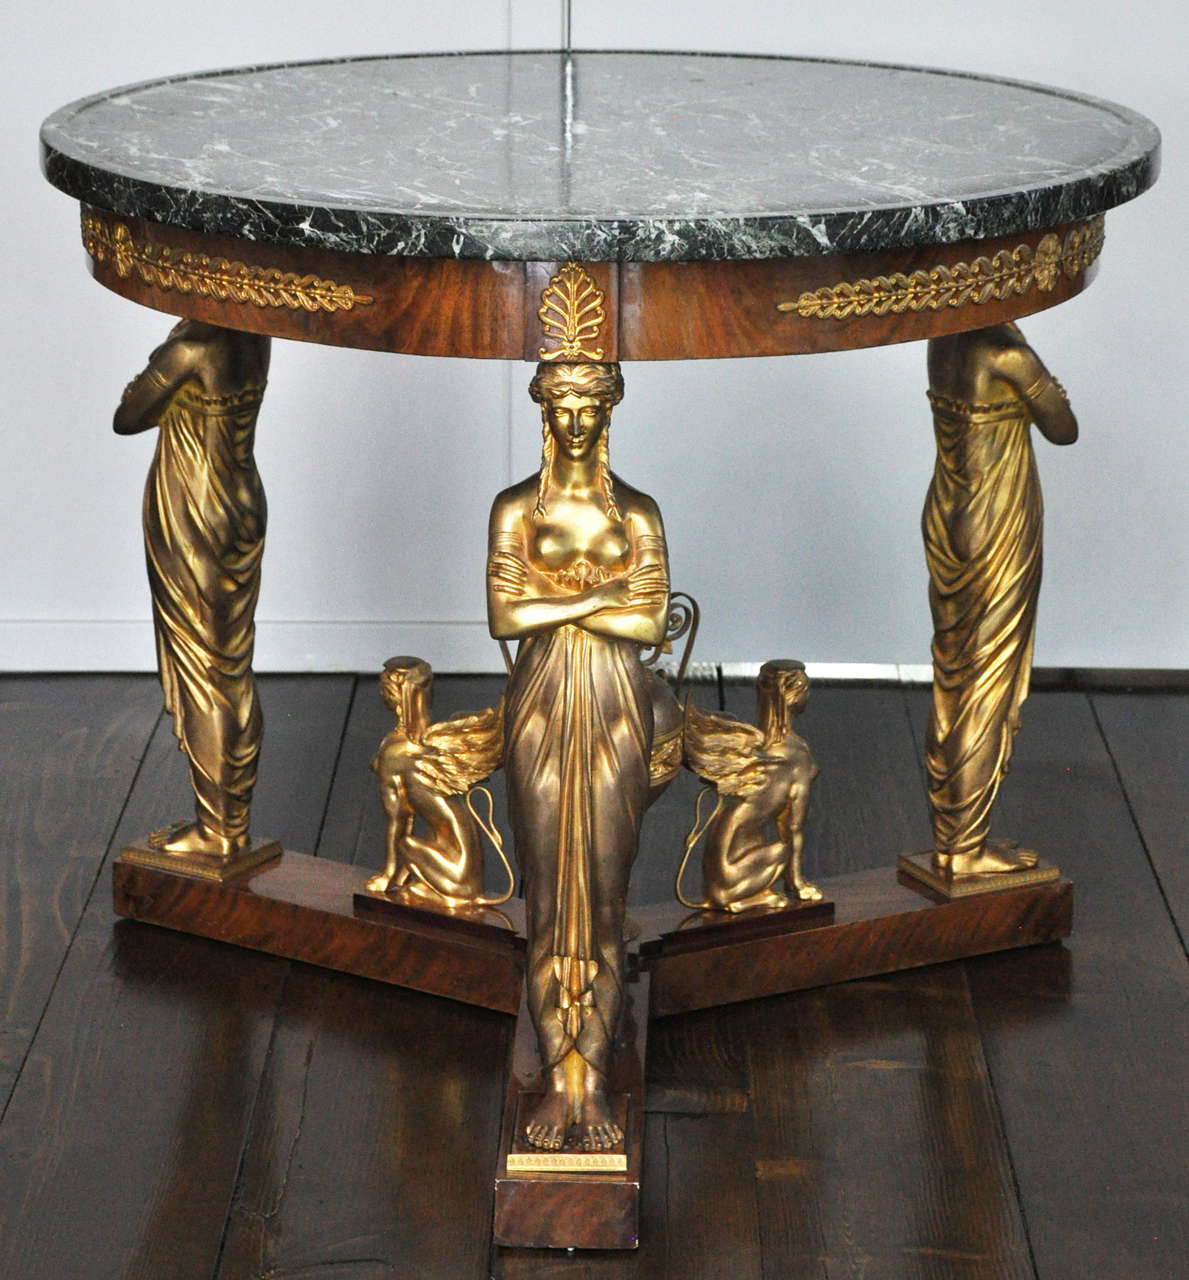 An important Empire style gilt bronze mounted mahogany salon table after a model from 1808 by Jacob-Desmalter. Circular verde antico marble top surface above a mahogany frame, the frieze mounted with laurel leaf banding alternating rosettes and